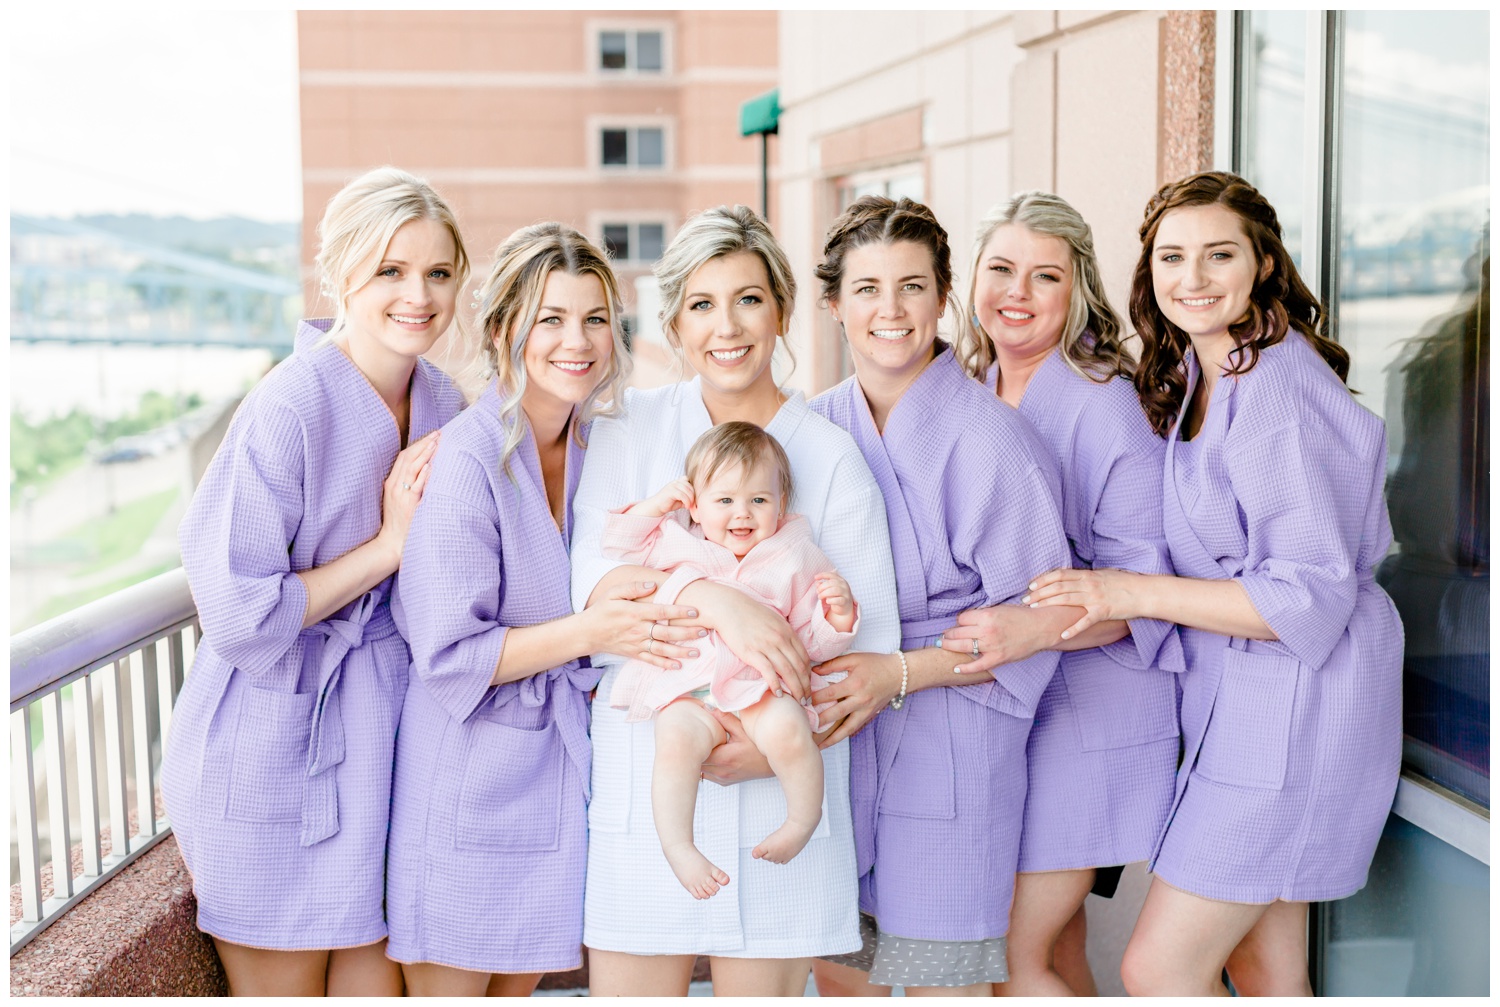 Bridesmaids in Matching Robes